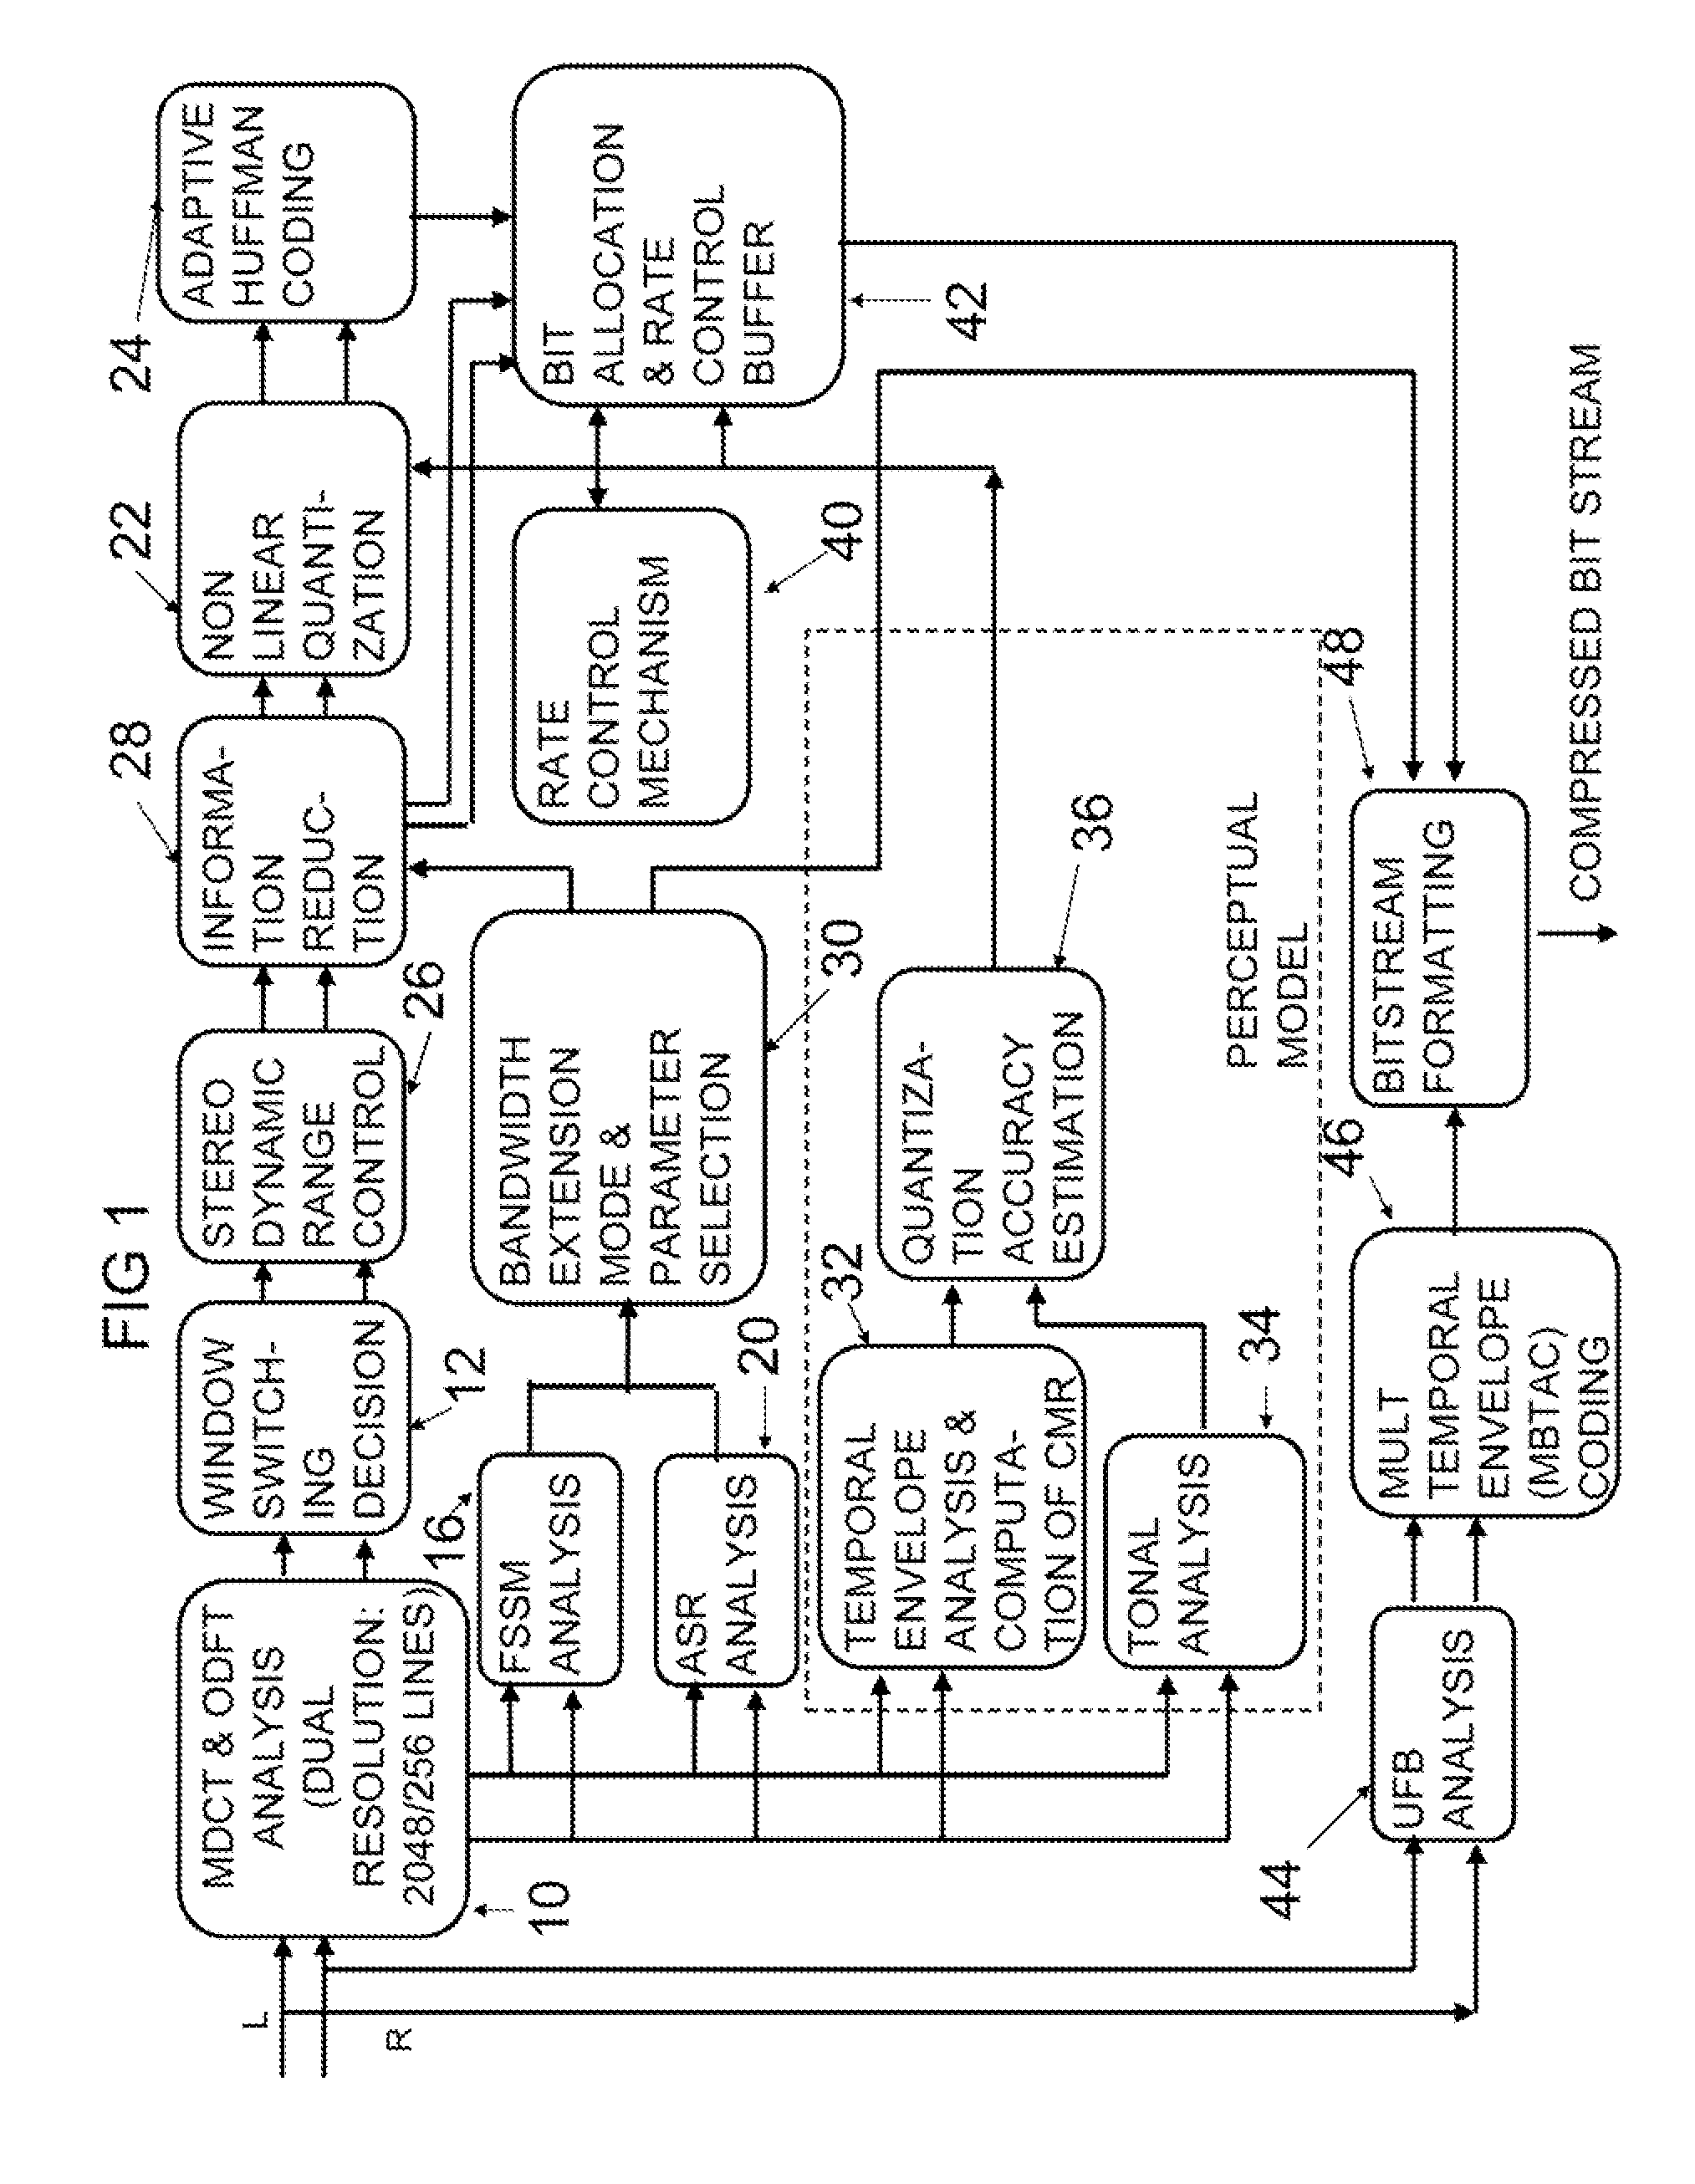 Method and apparatus for encoding and decoding